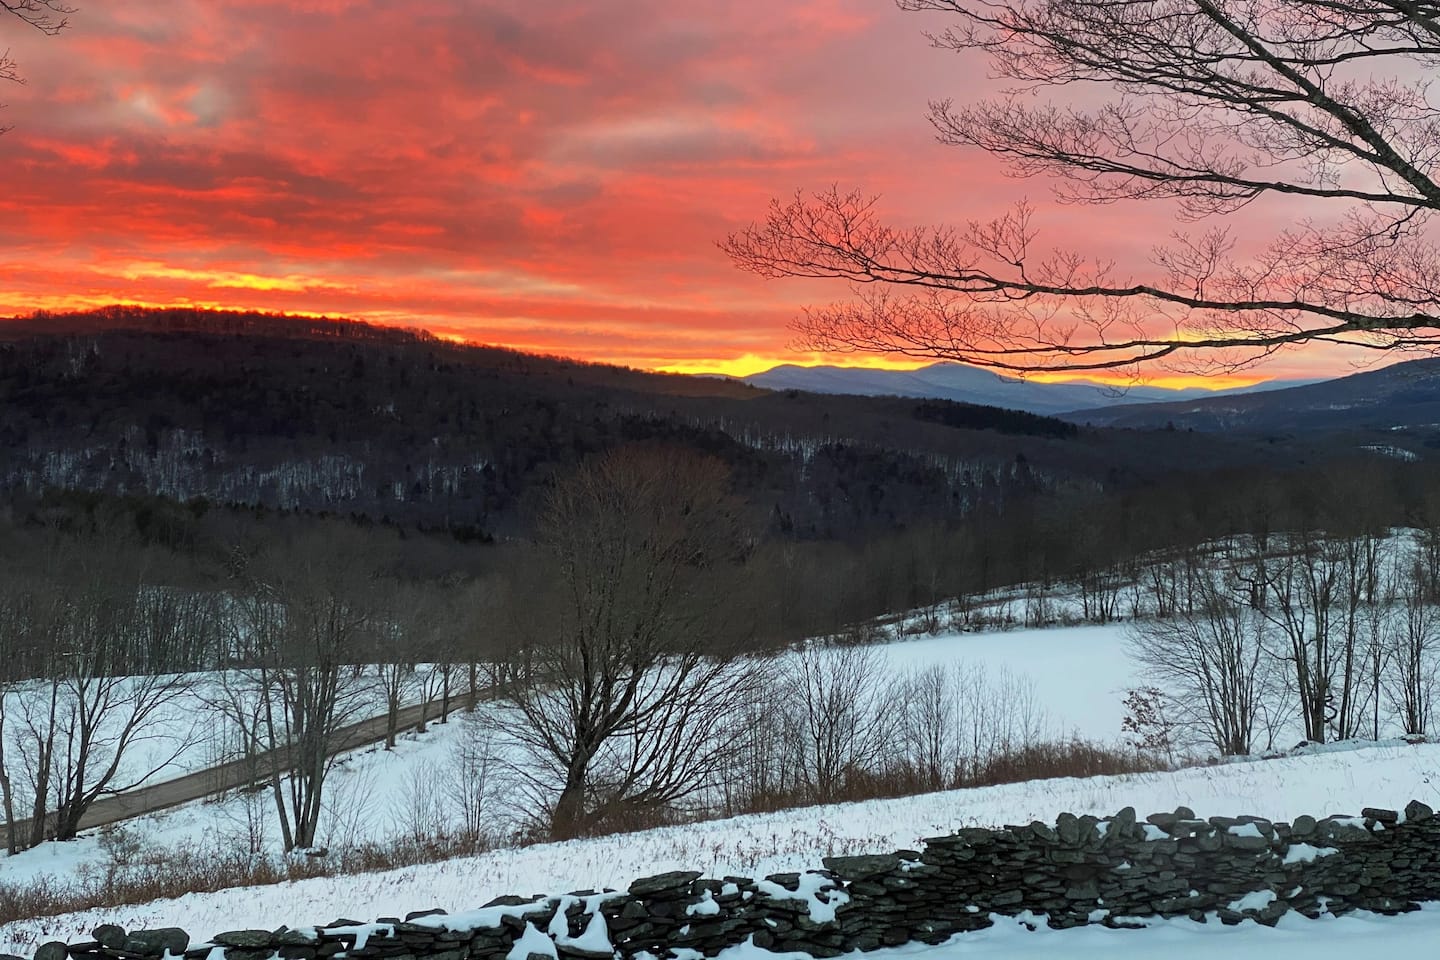 Winter can be one of the most beautiful times in the Catskills!